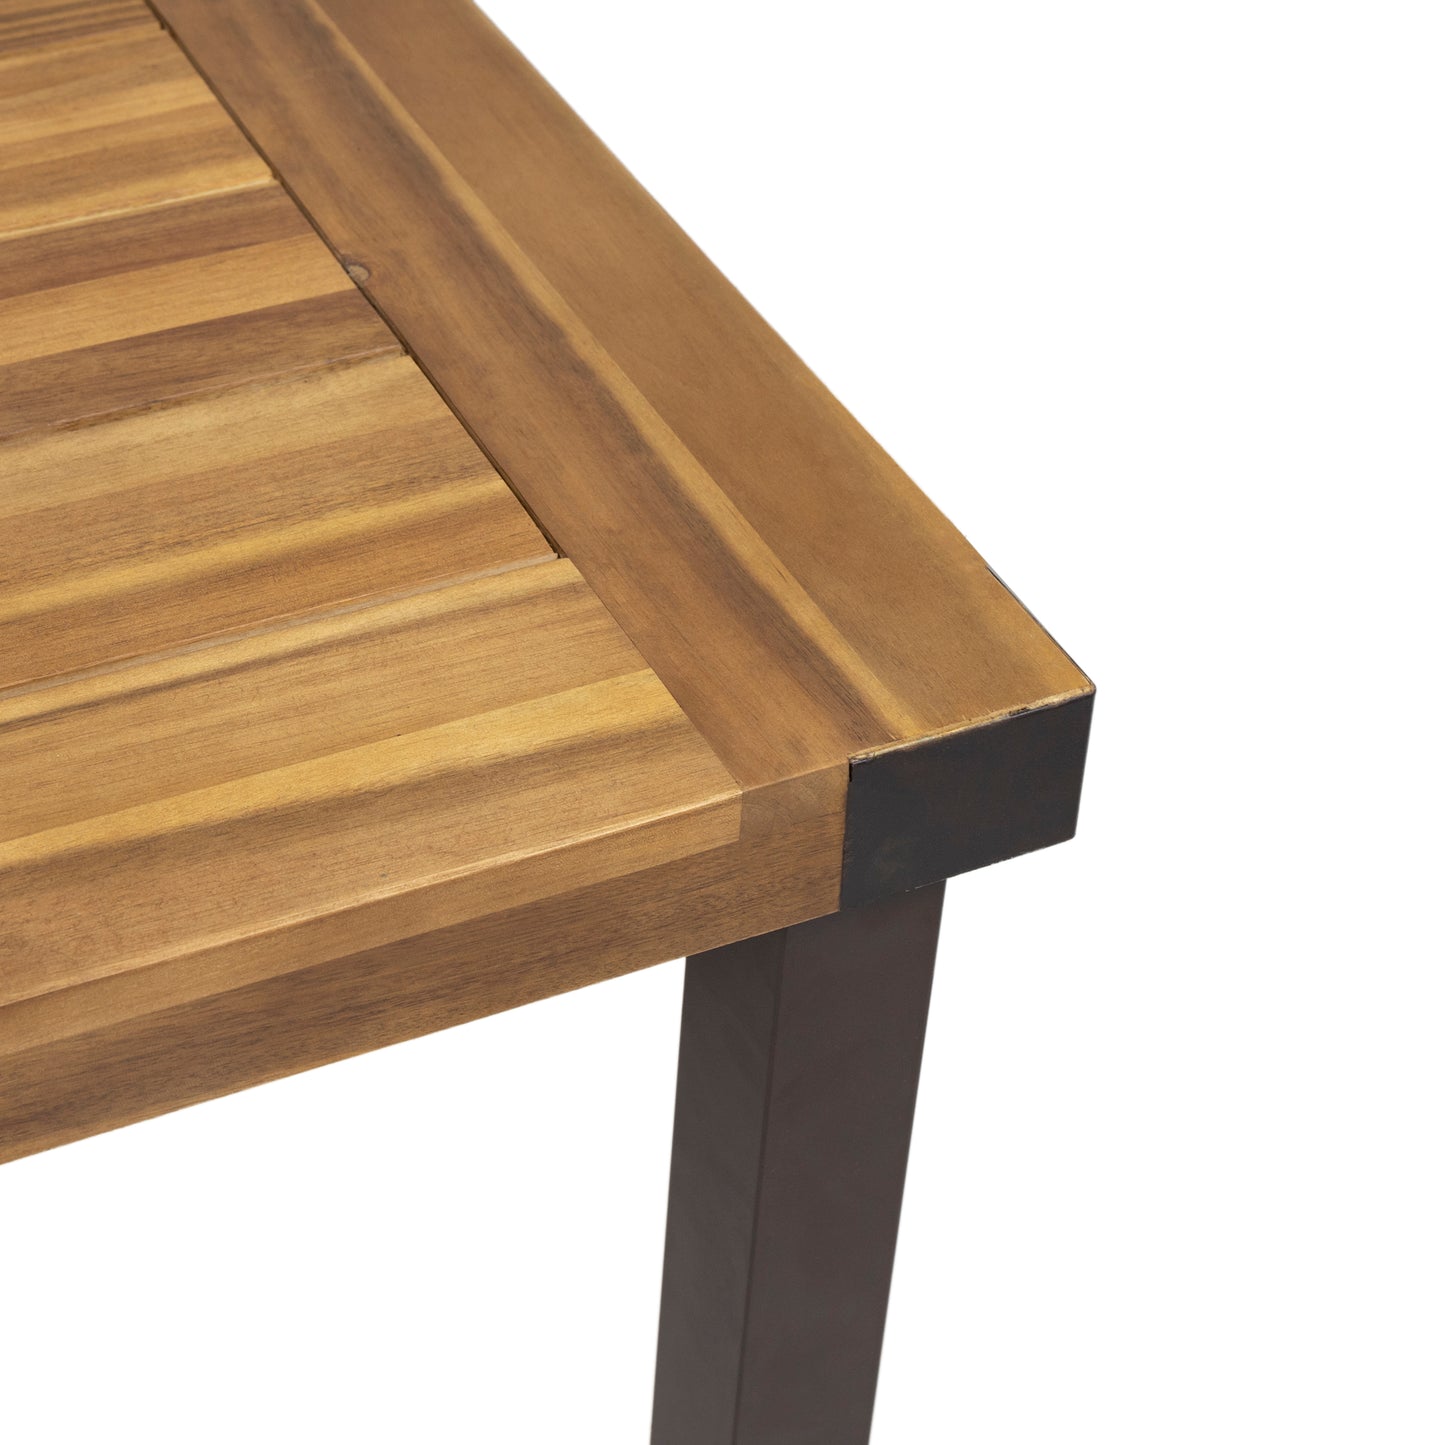 Maggie Outdoor Acacia Wood Dining Table